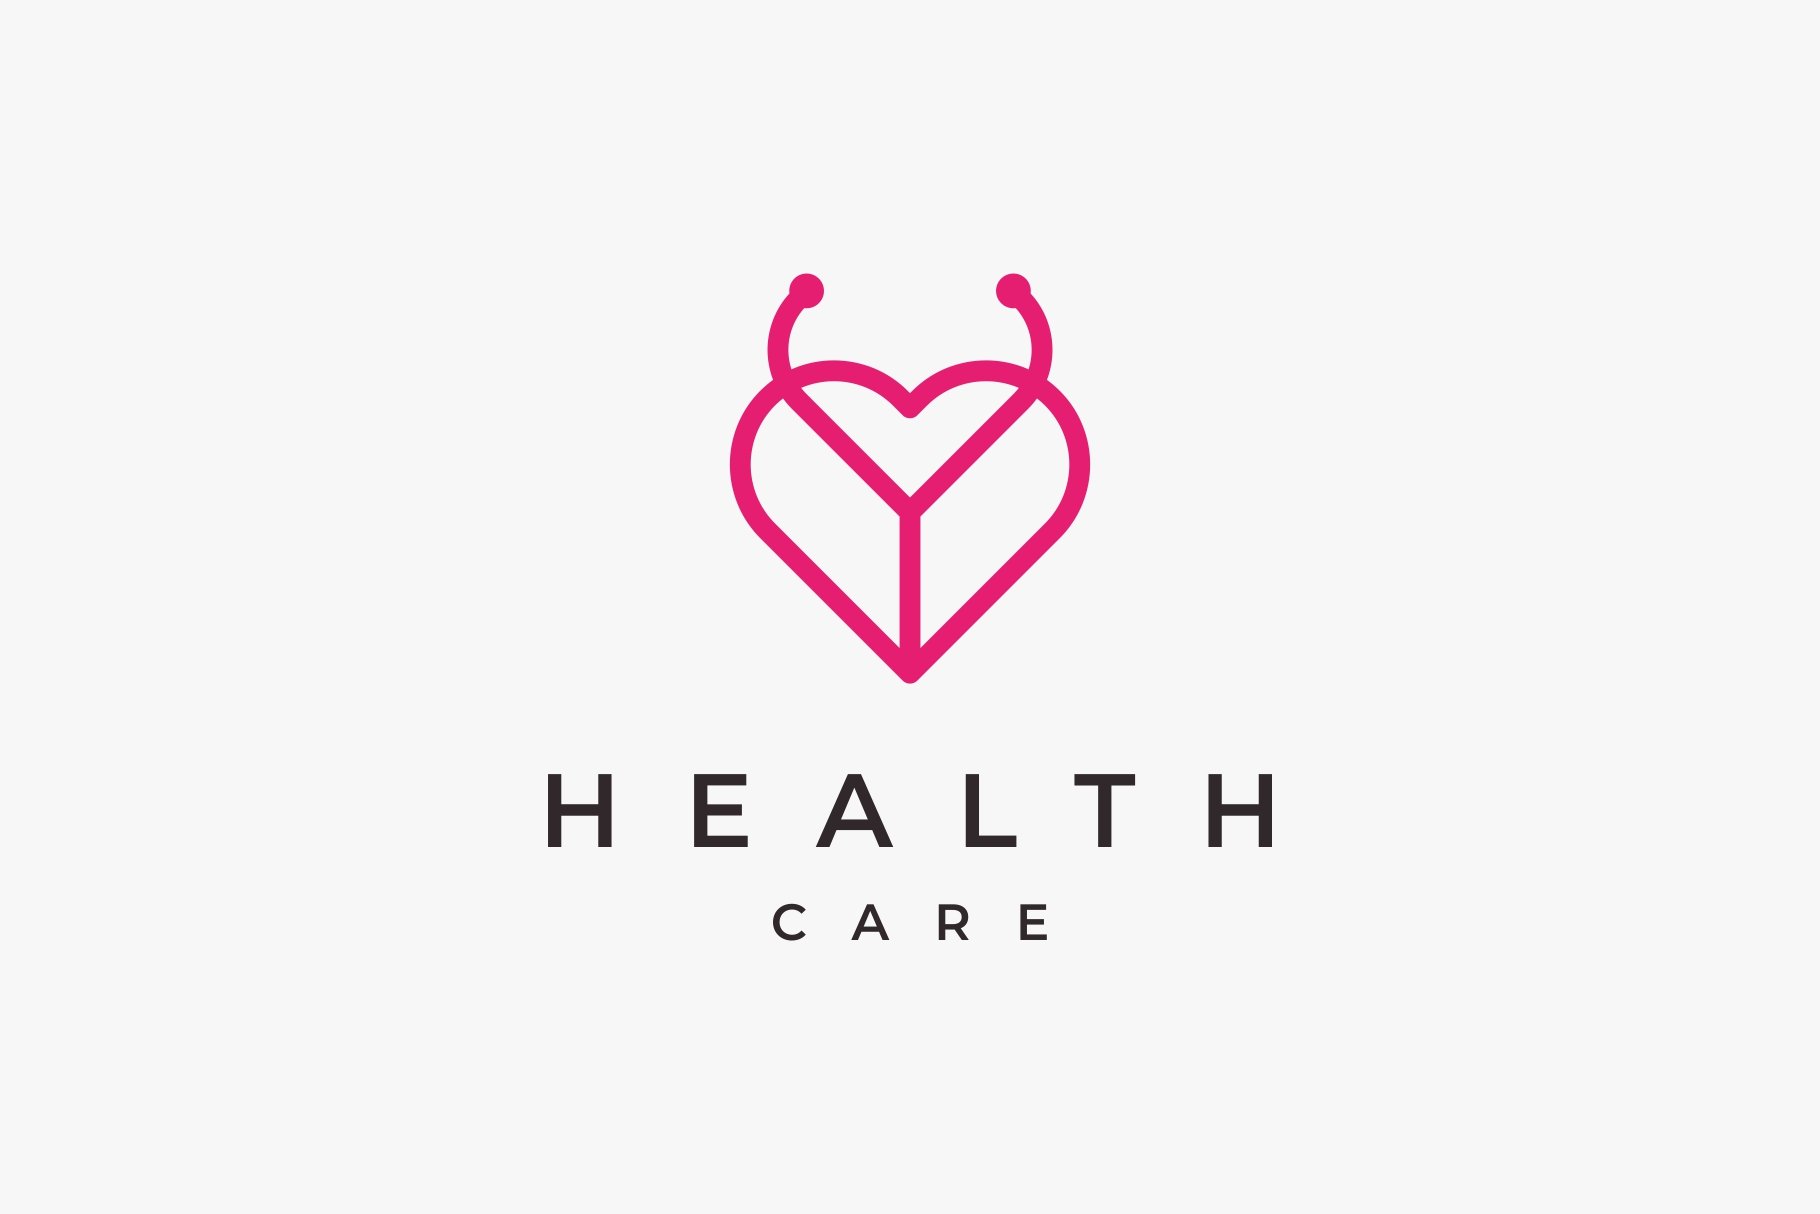 Stethoscope Heart Simple Logo cover image.